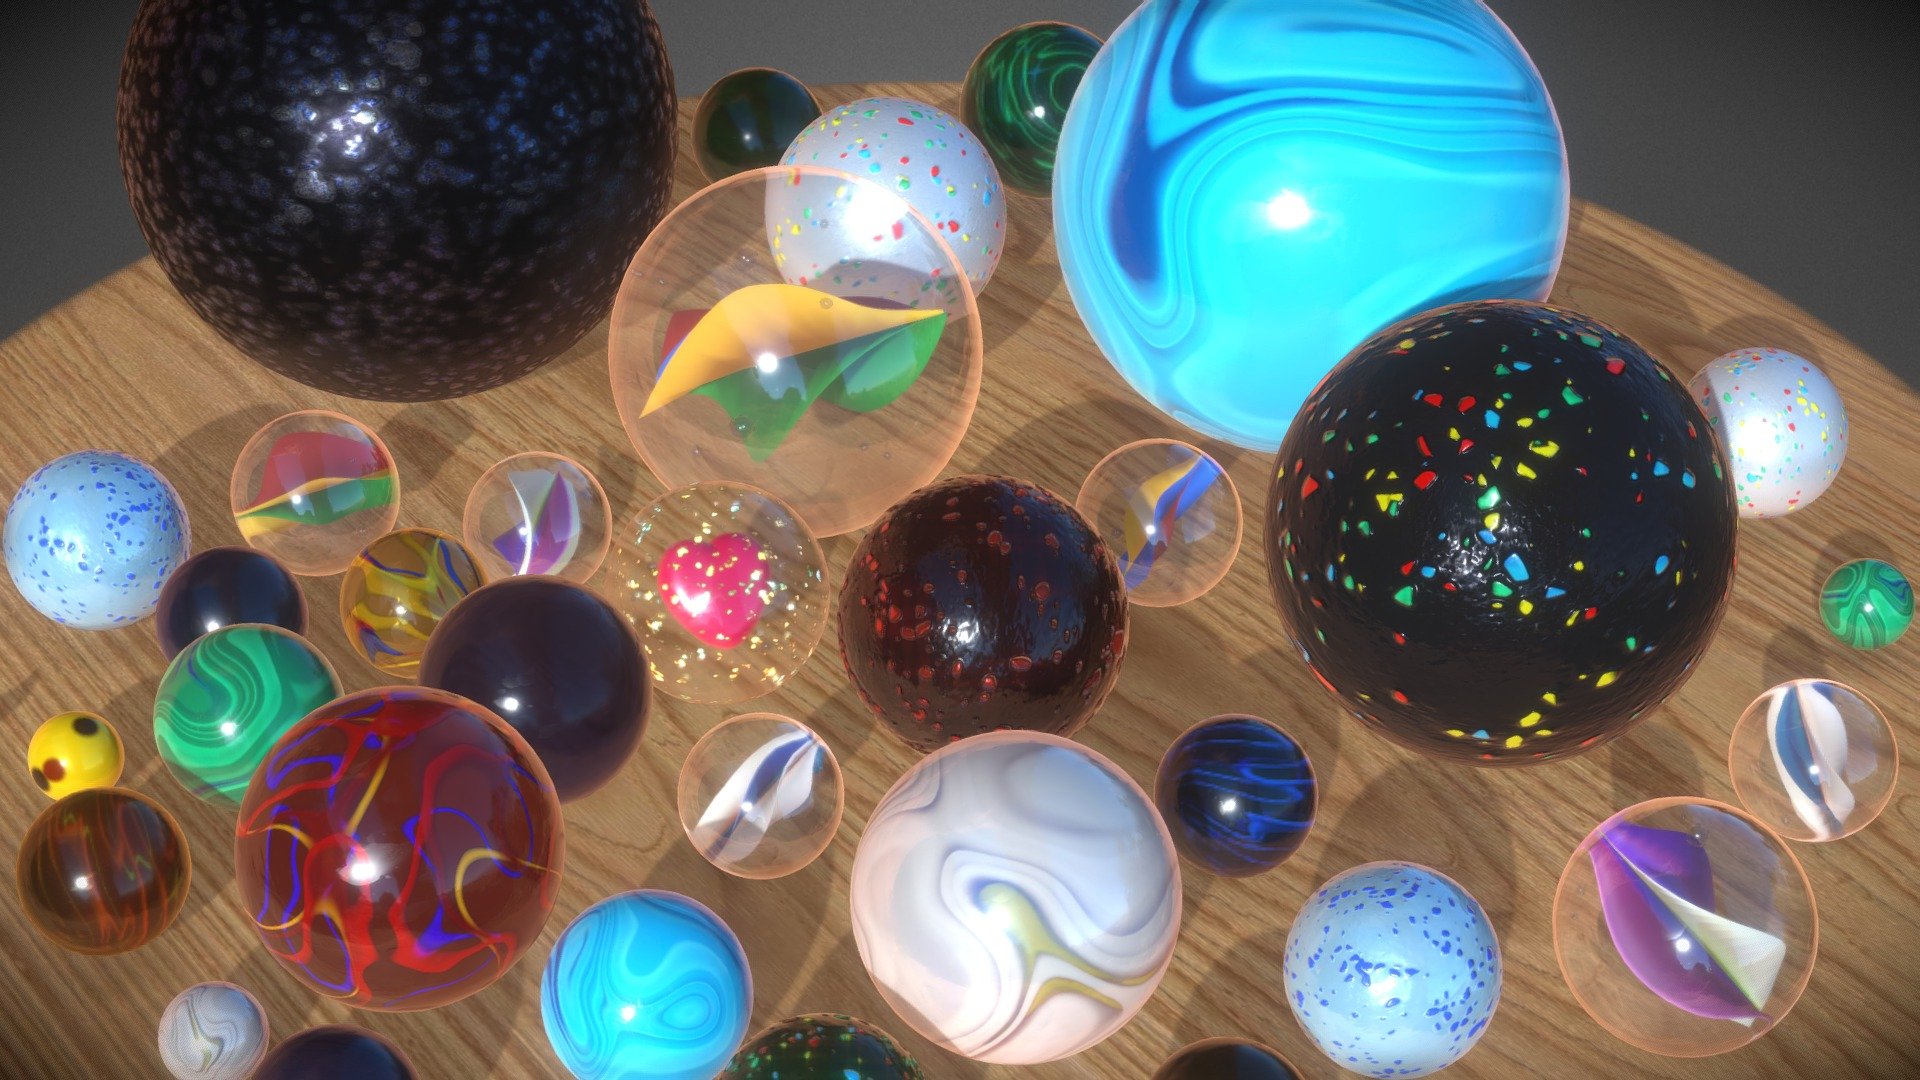 The other day I found a lonely marble on a street ground.
As a kid, I used to enjoy playing with marbles and I was amazed by how they could come in so many different colors and patterns.
Feeling nostalgic, I decided to create a mini scene of marbles and play around with various Sketchfab refraction, coating and shader effects.

This 3D scene is also a tribute to the marvelous classic video game: &ldquo;Marble Madness&ldquo; - Marbles Craziness - Buy Royalty Free 3D model by Thomas Veyrat (@veyratom) 3d model